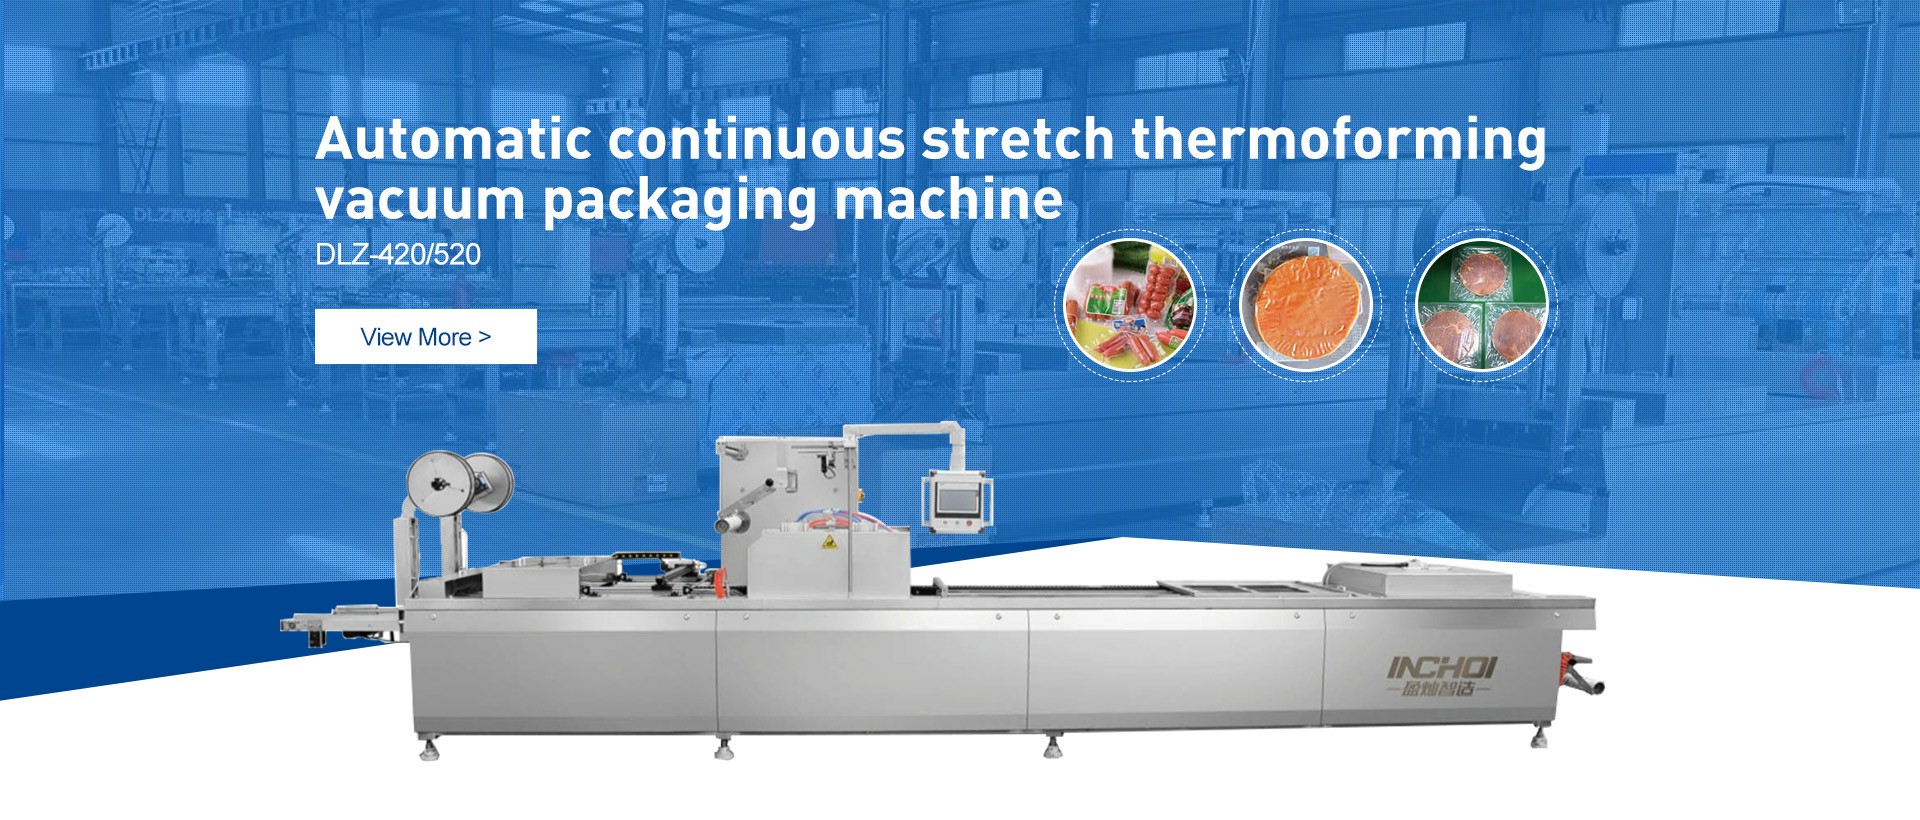 Thermo forming vacuum packing machine